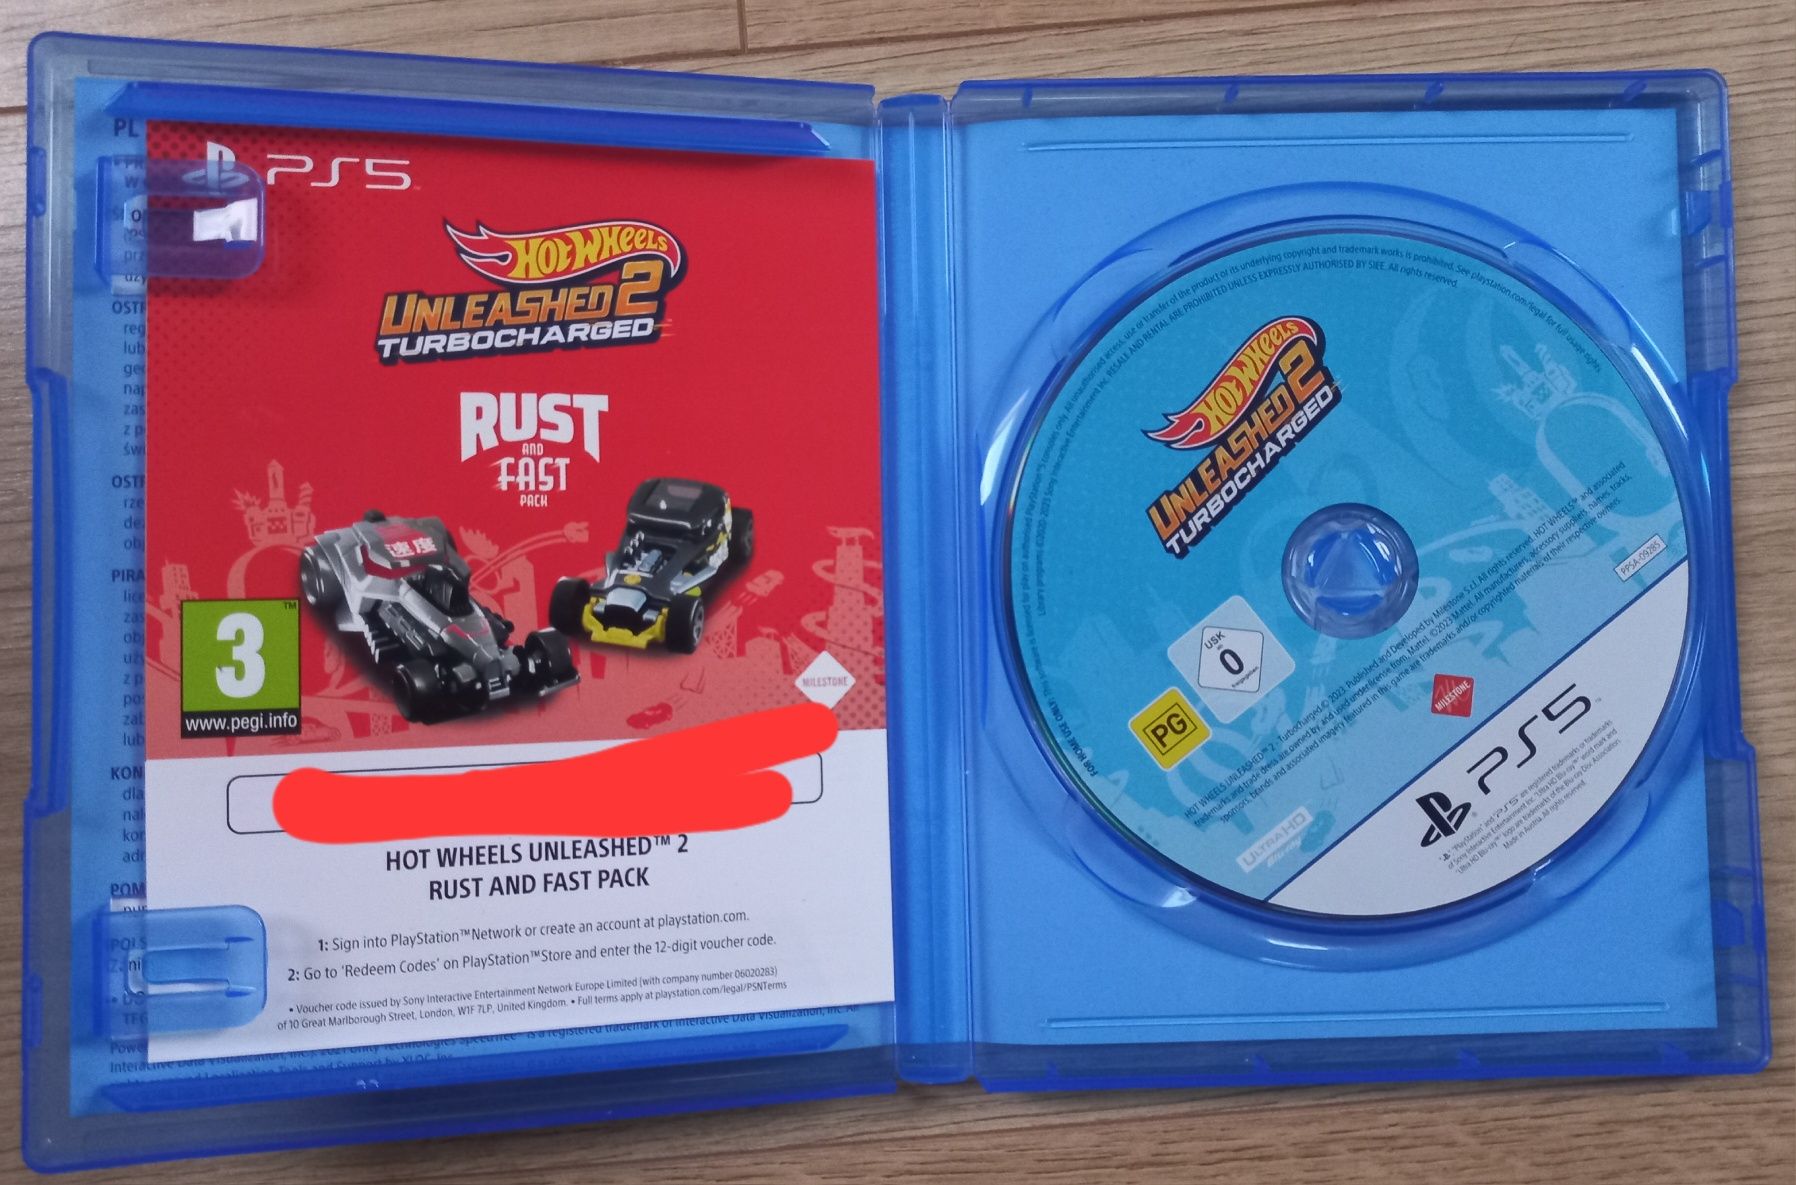 Hot Wheels Unleashed 2 ps5